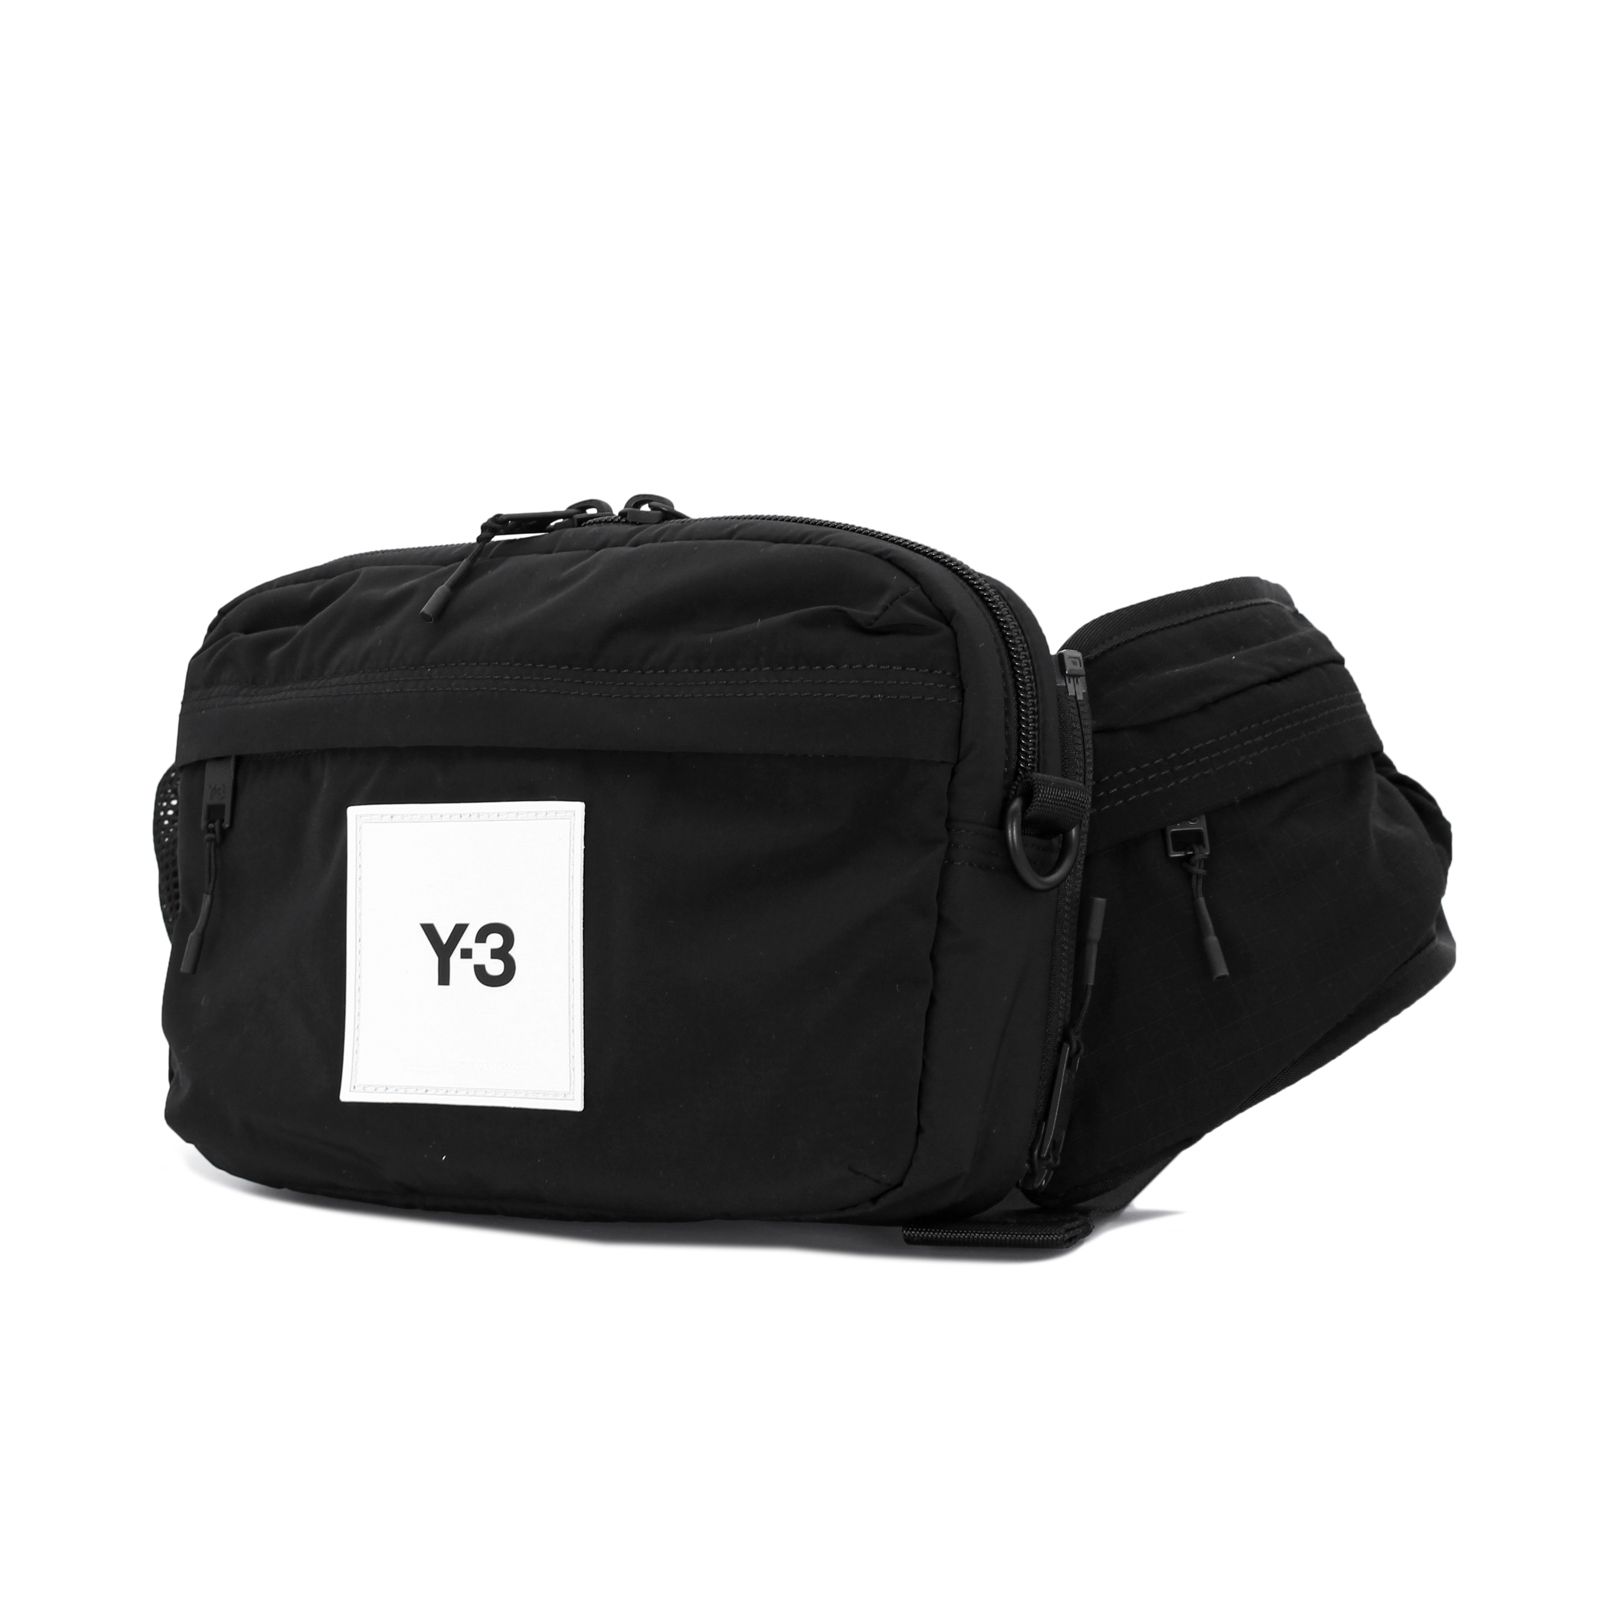 Y-3 - Y-3 CLASSIC SLING BAG / GT8920-ACCS21 | ALUBUS / RUFUS